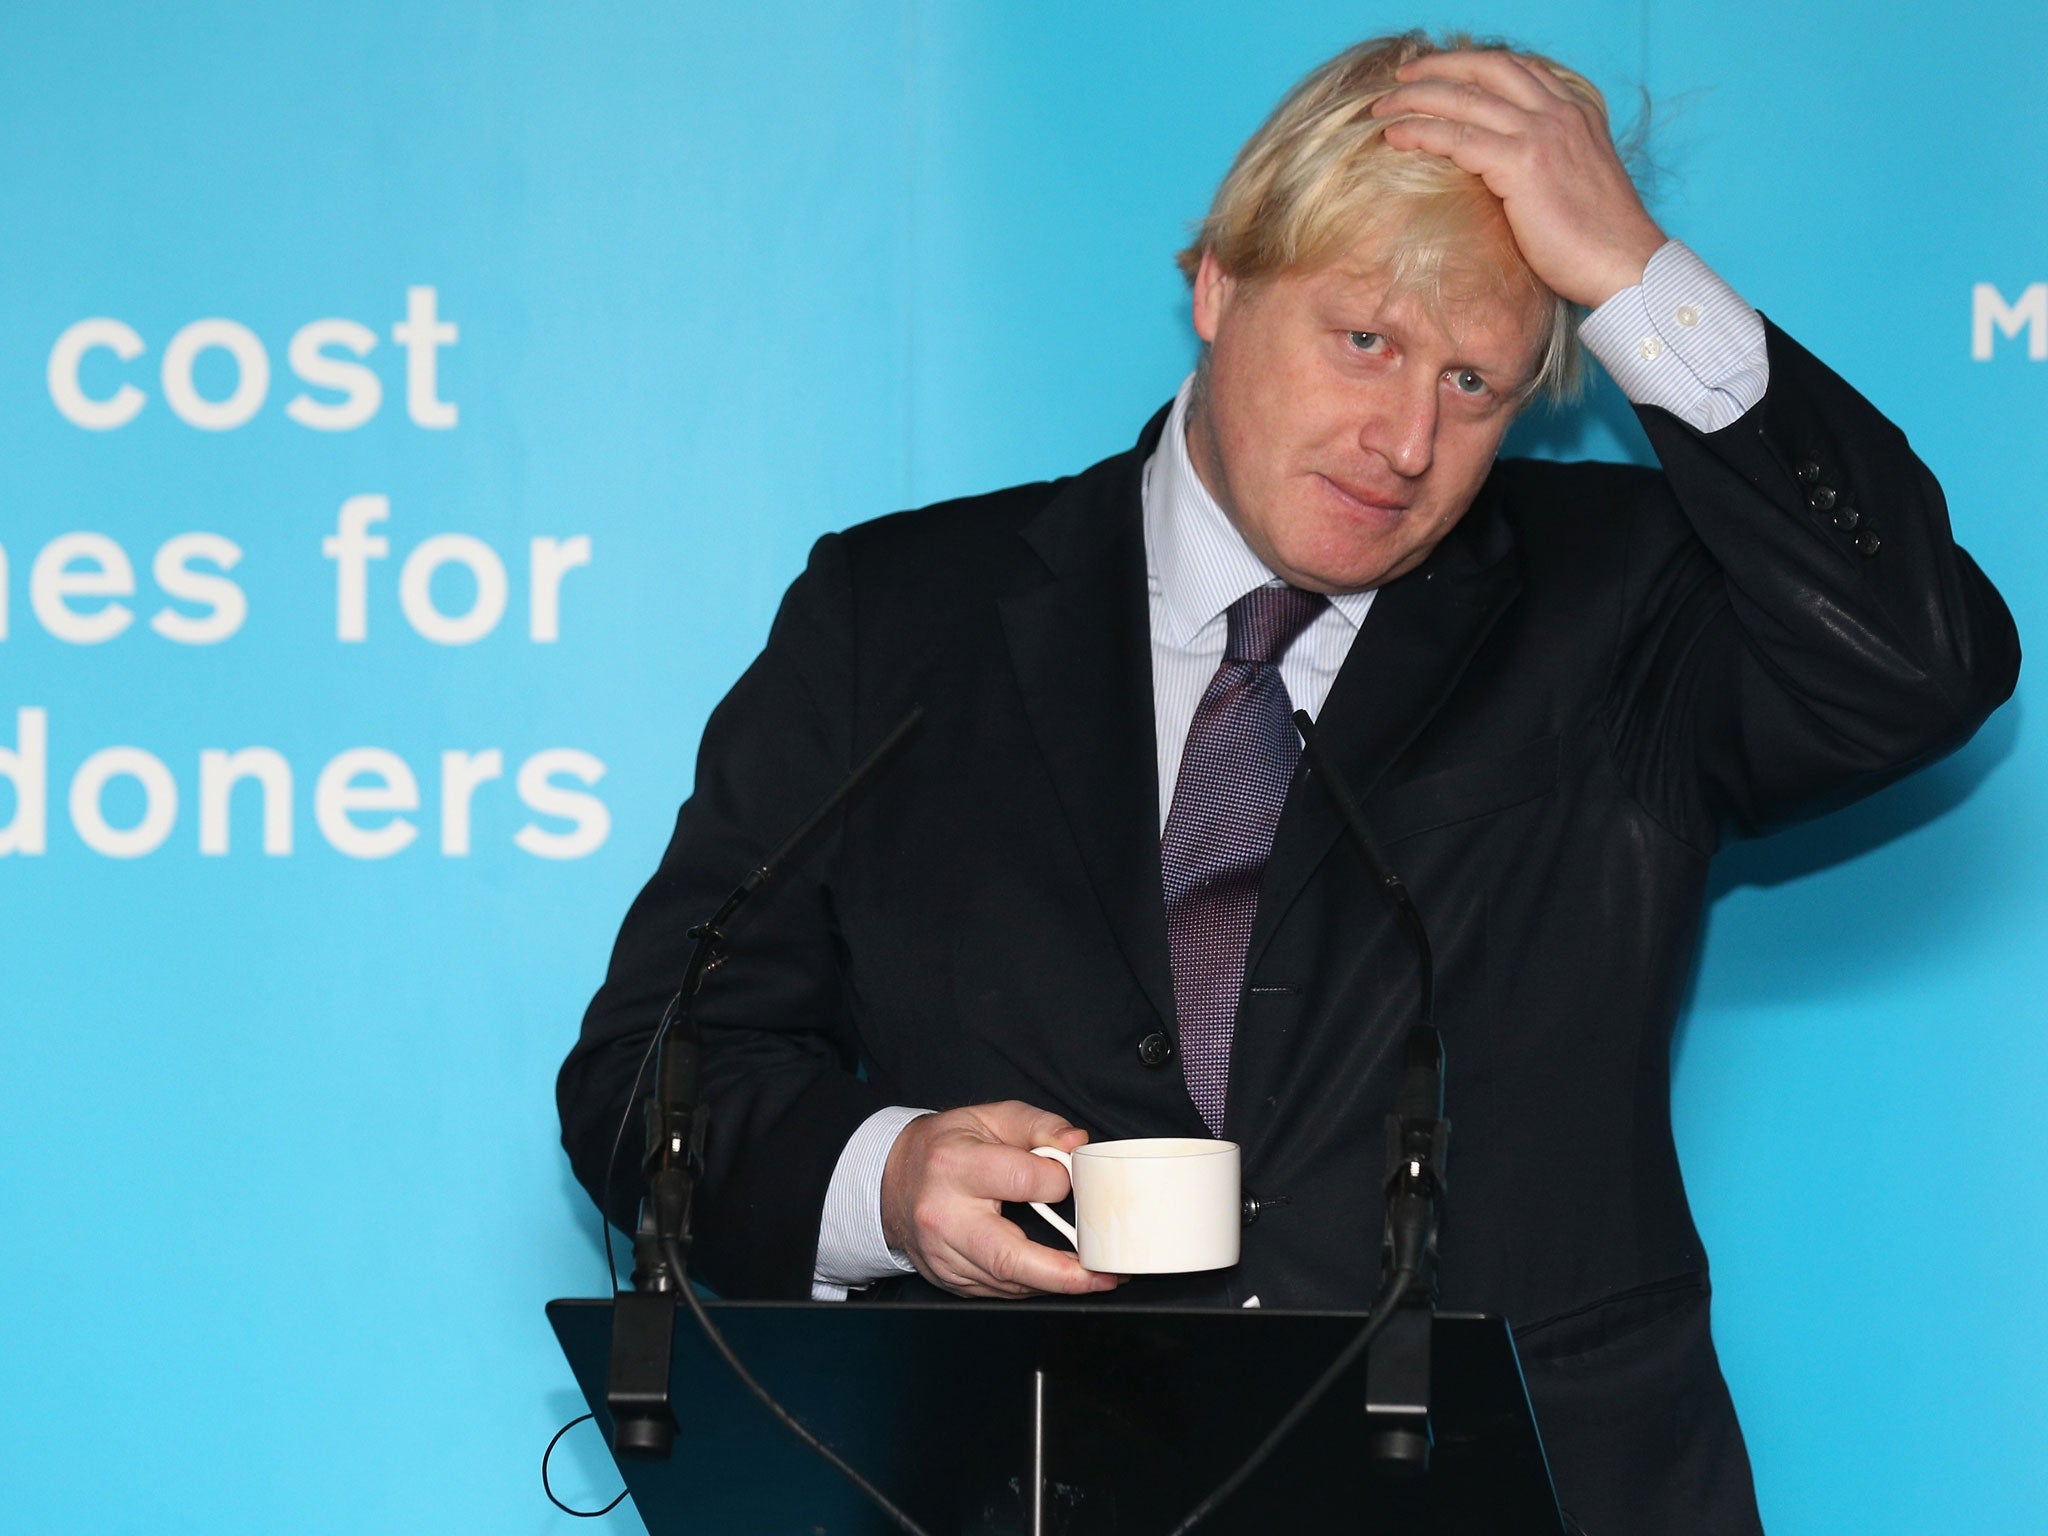 The Mayor of London really got to the core of the city’s issues in his last #AskBorris Q&A of 2013